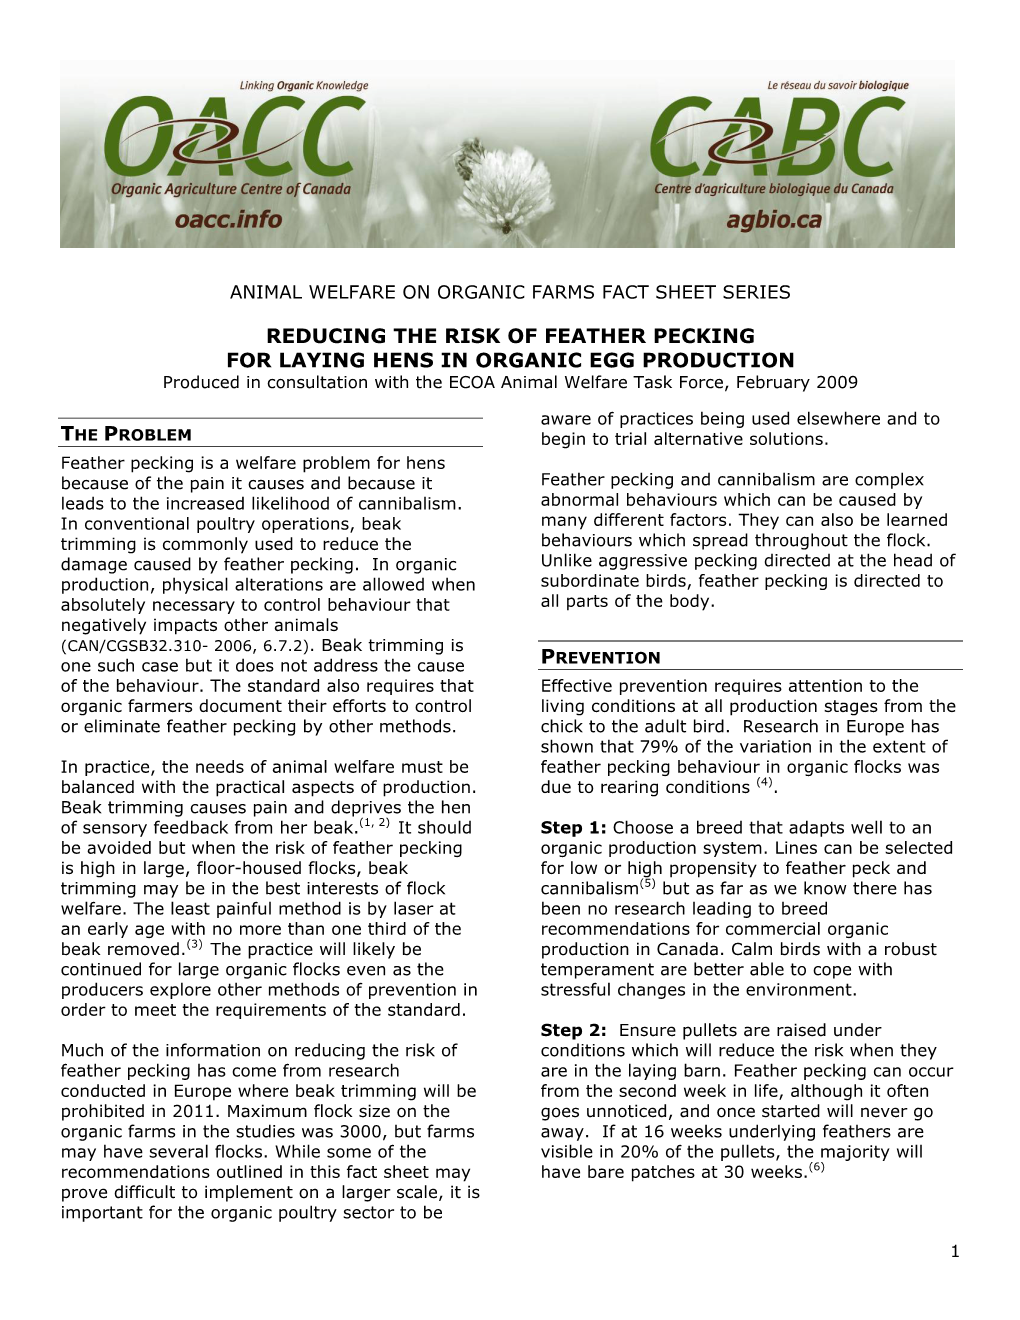 REDUCING the RISK of FEATHER PECKING for LAYING HENS in ORGANIC EGG PRODUCTION Produced in Consultation with the ECOA Animal Welfare Task Force, February 2009